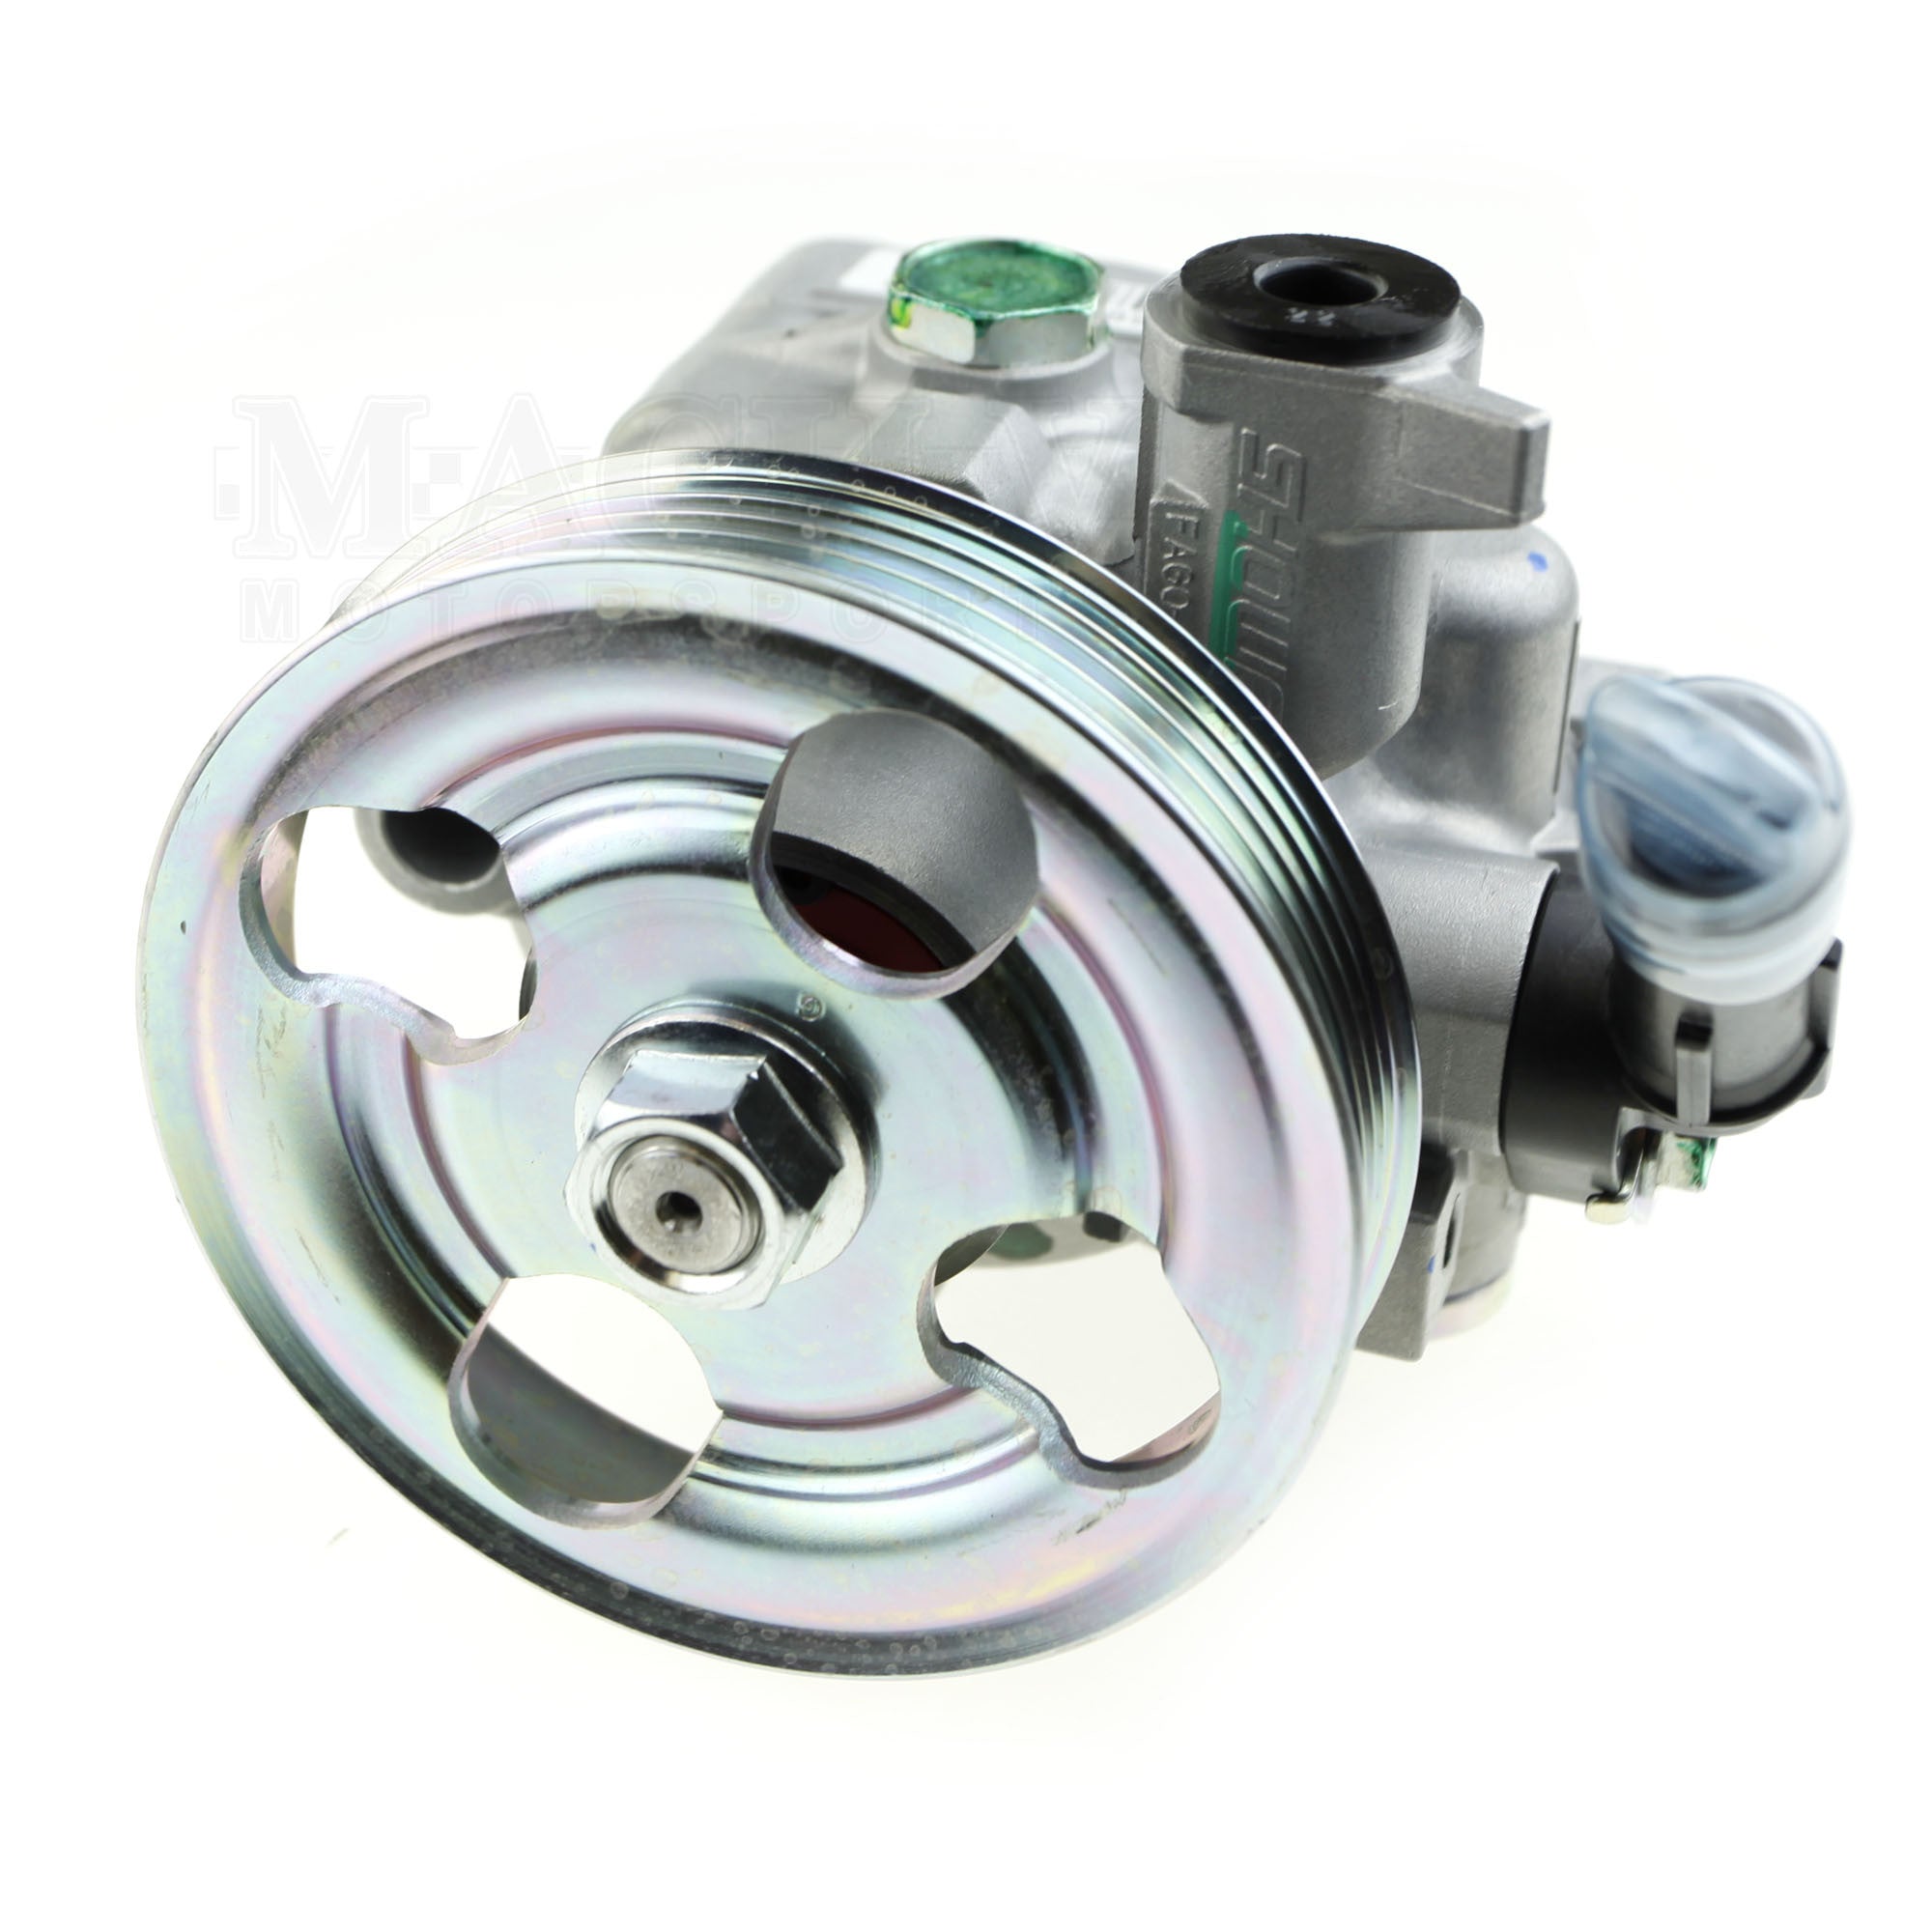 Power Steering Pump For 2005 Ford Escape